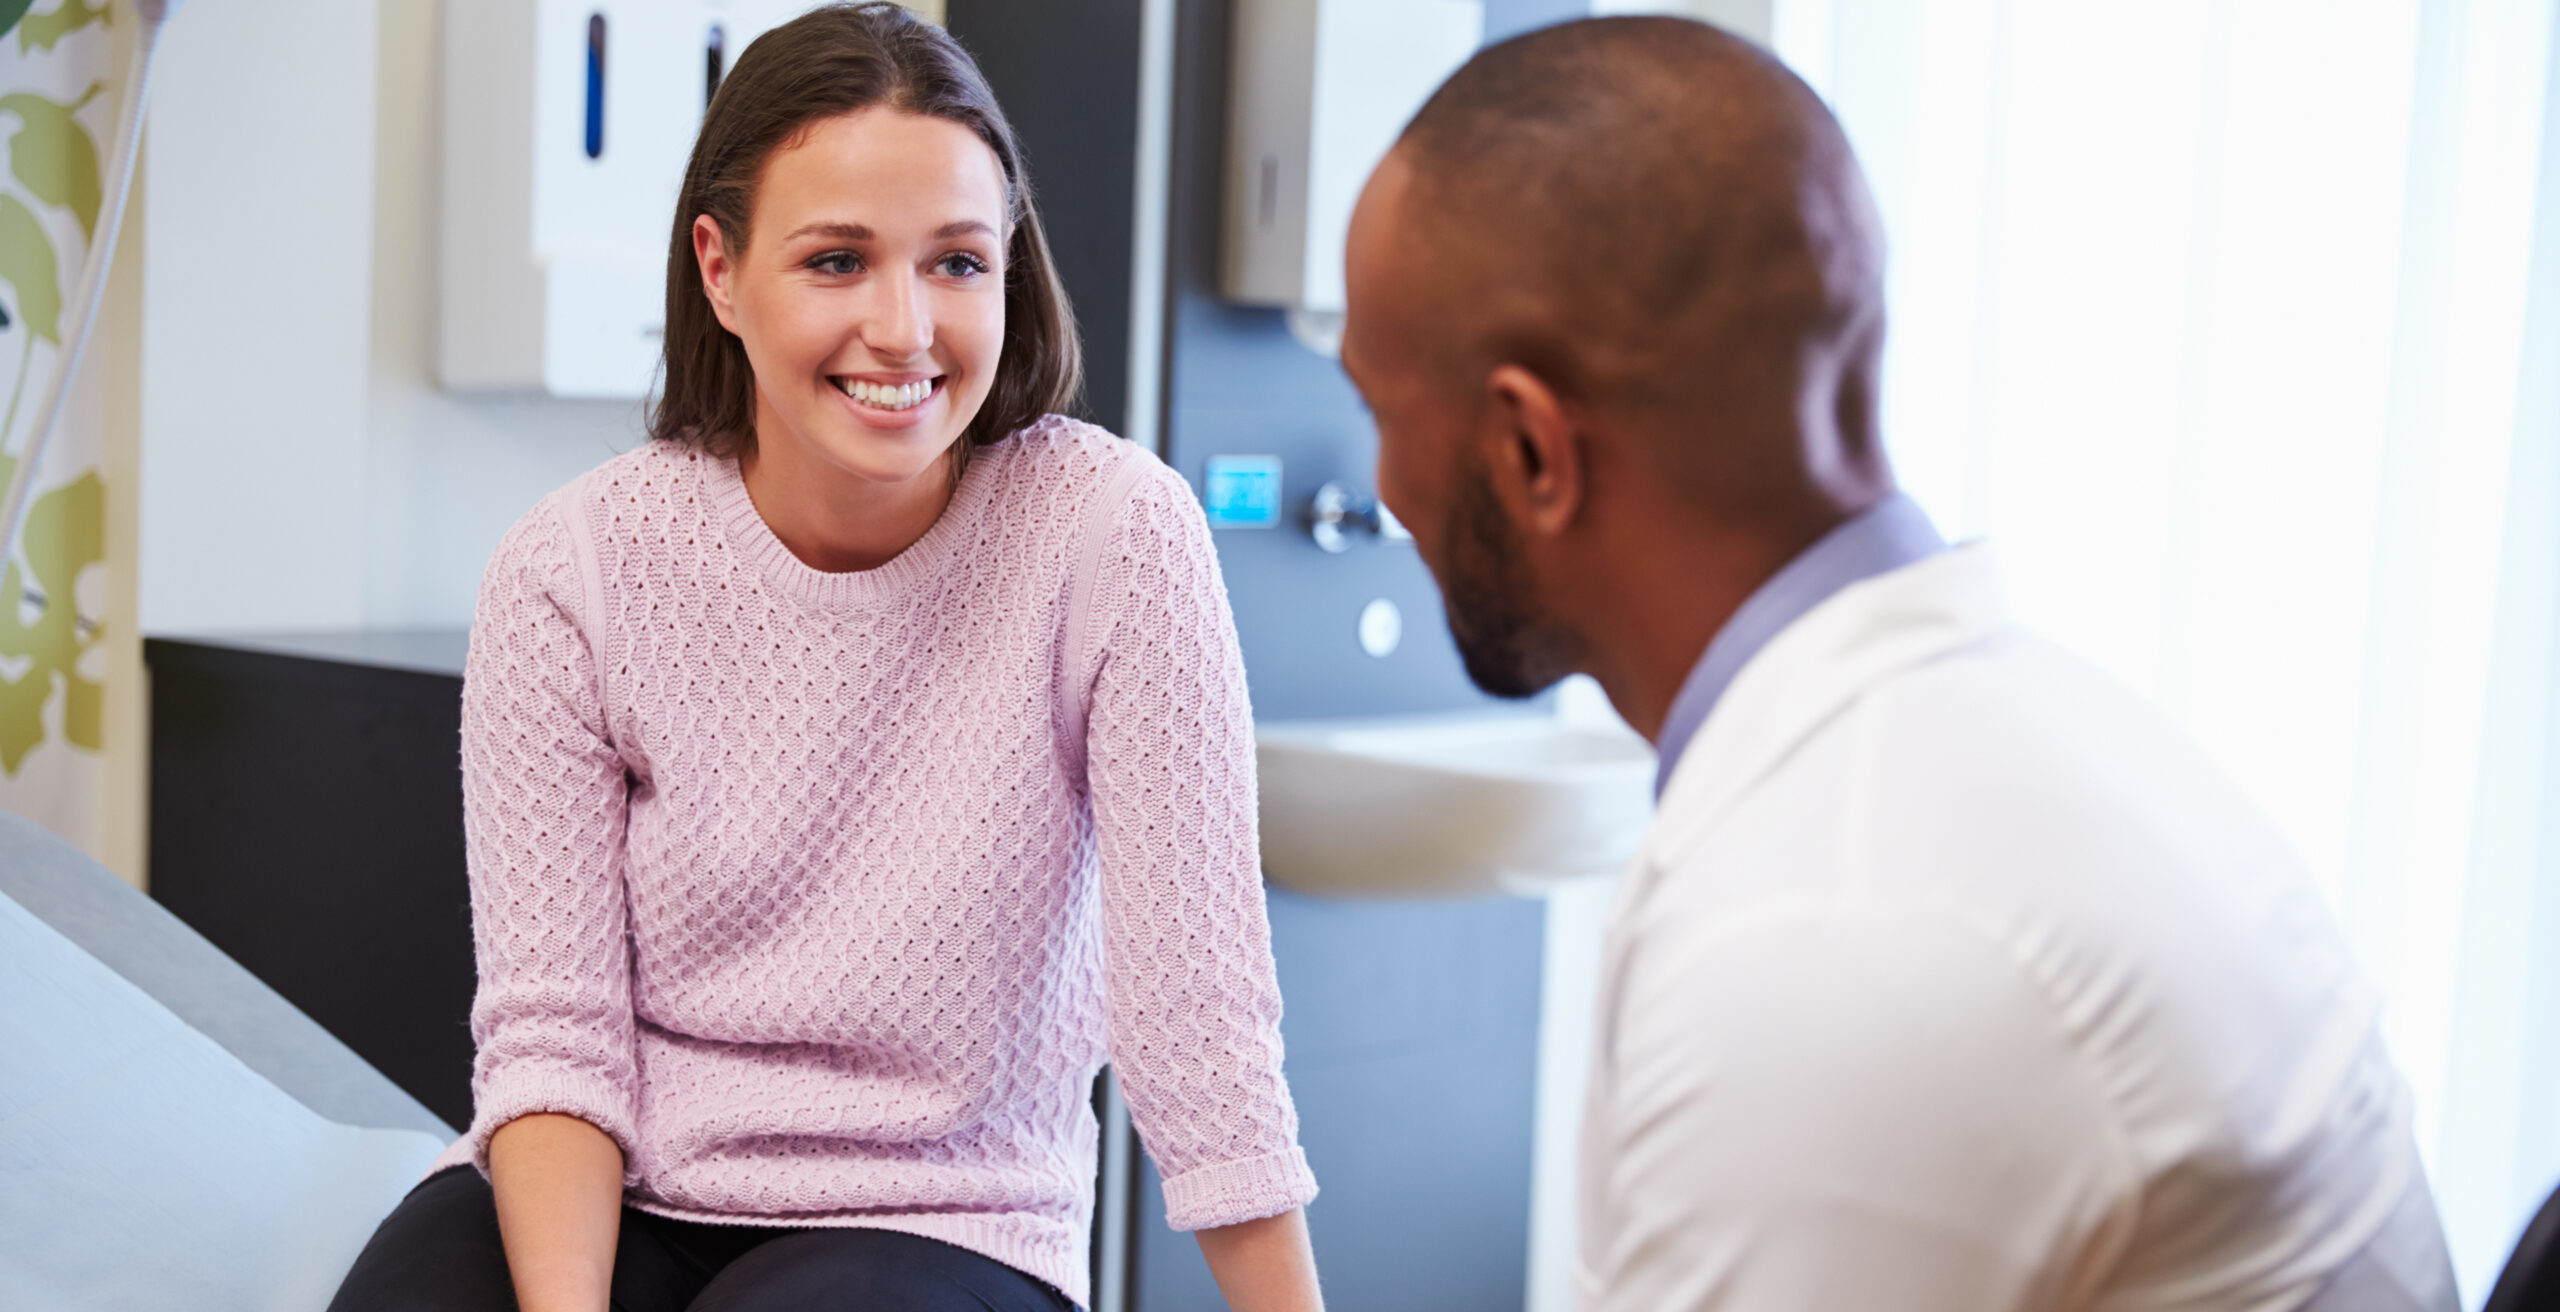 7 Reasons You’re Not Acquiring New Patients